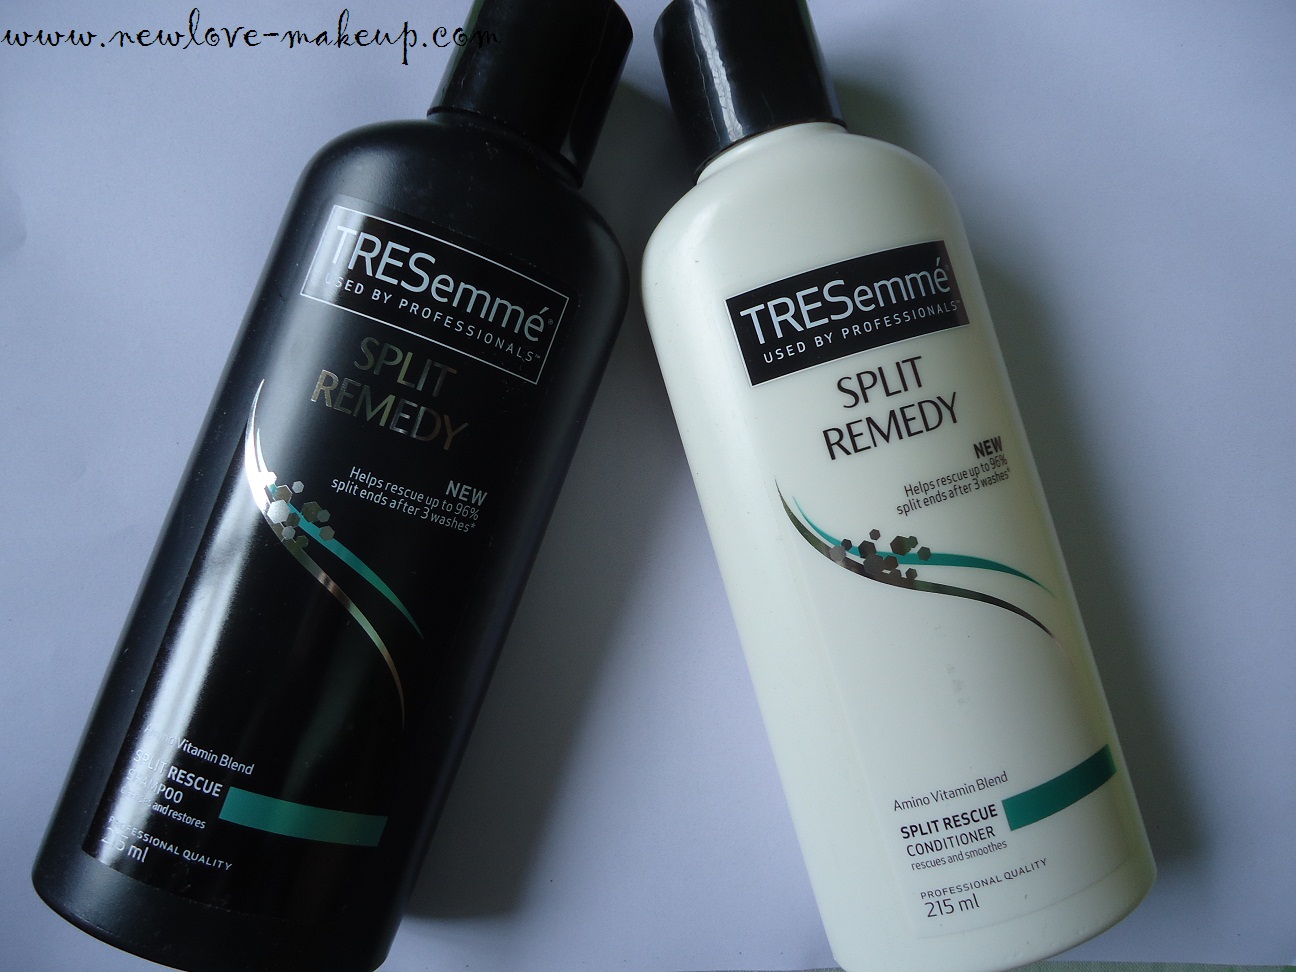 TRESemme End Remedy Shampoo, Conditioner Review - Love Makeup